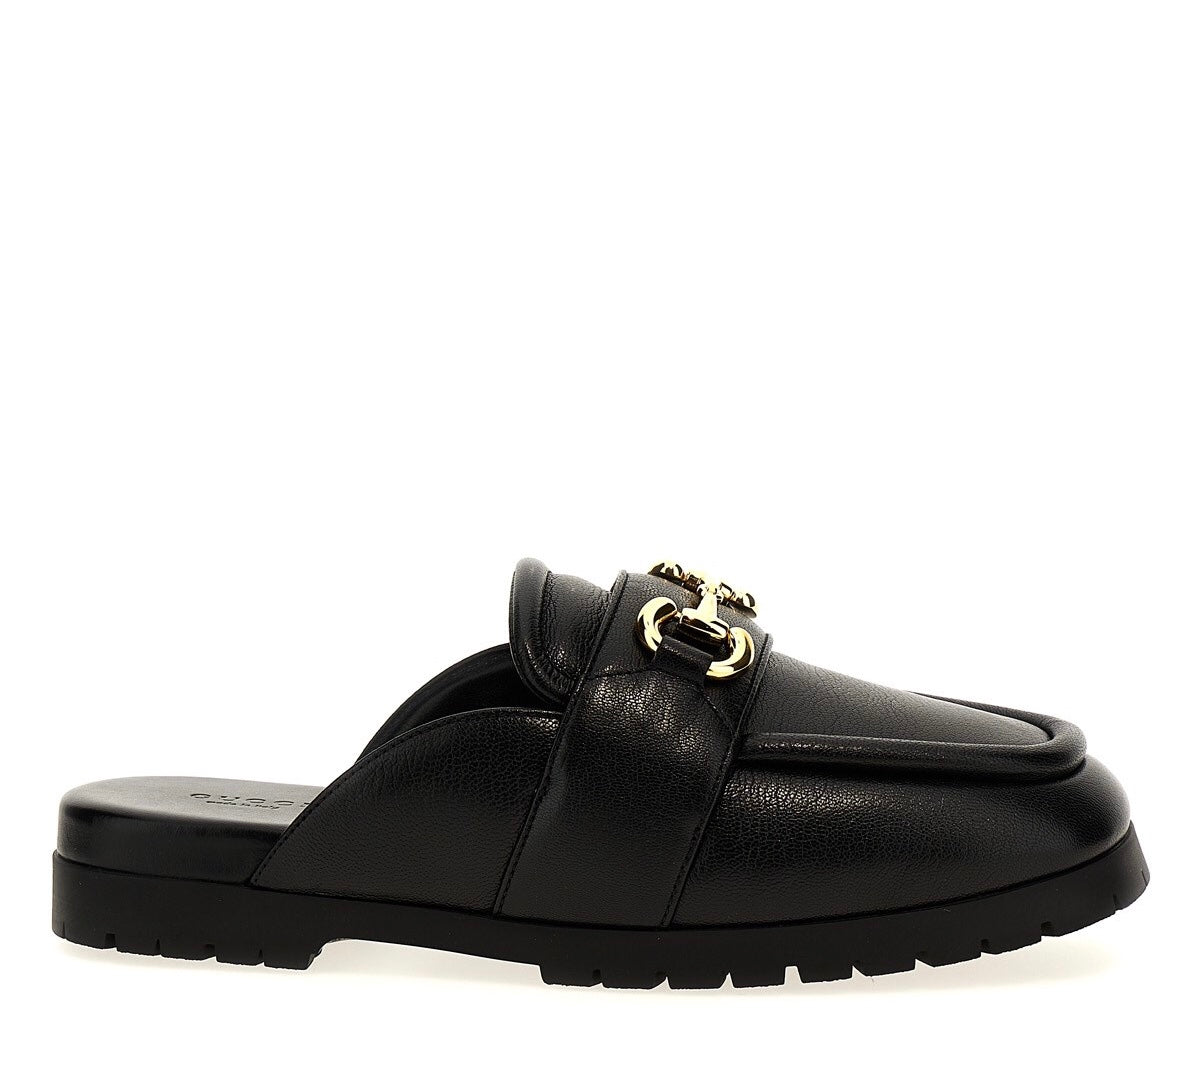 GUCCI WOMEN’S LEATHER MULES